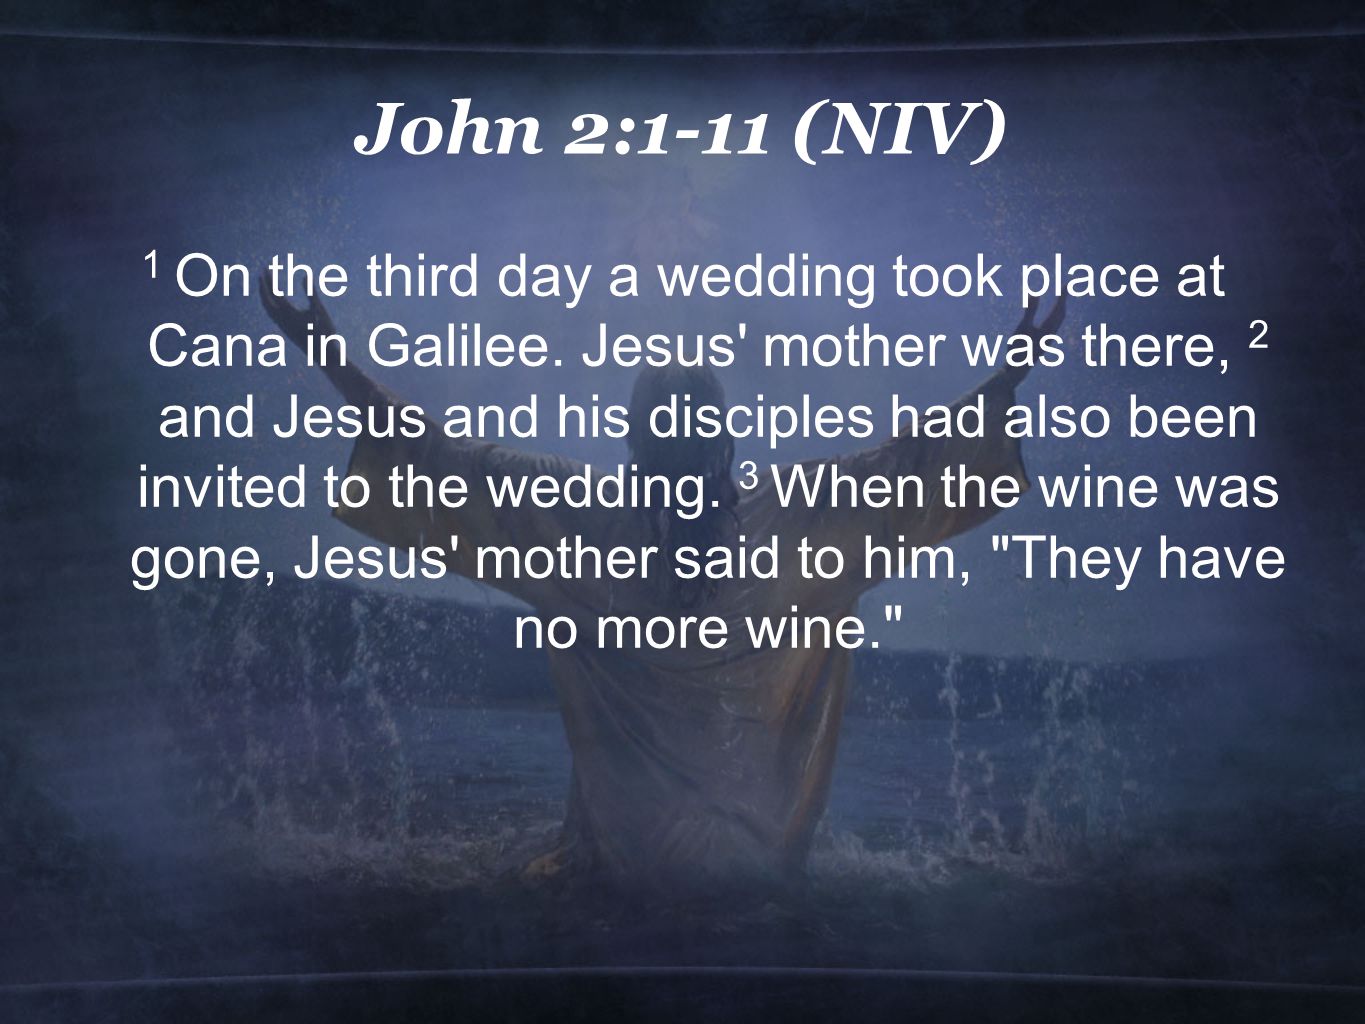 John 2:1-11 (NIV) 1 On the third day a wedding took place at Cana in Galilee.